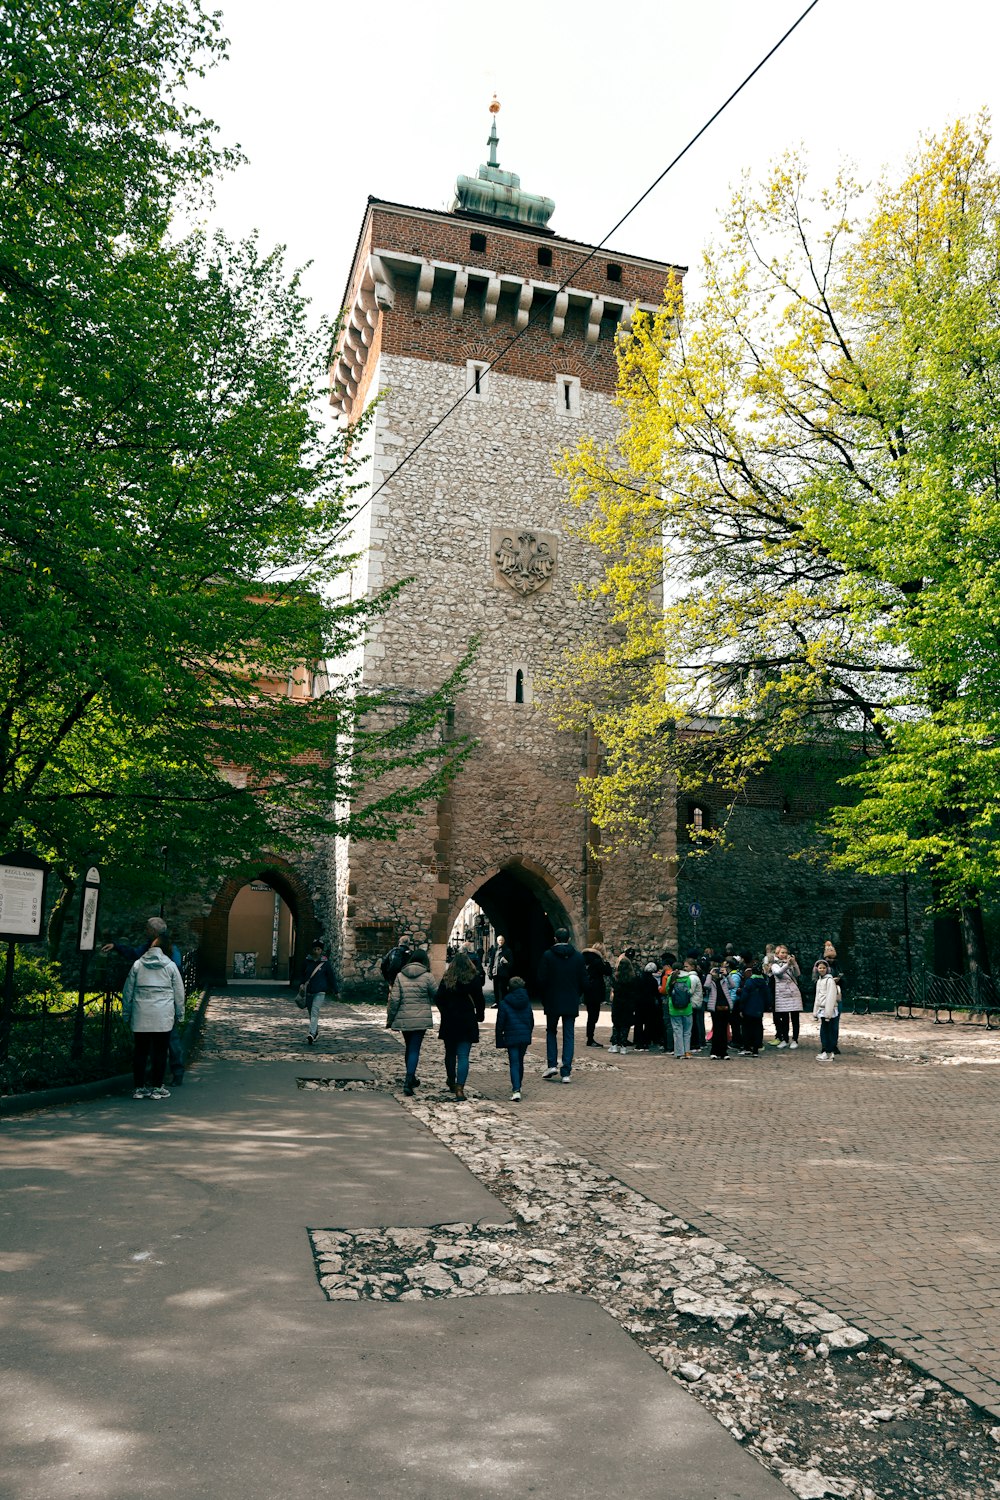 a group of people walking down a street next to a tall tower